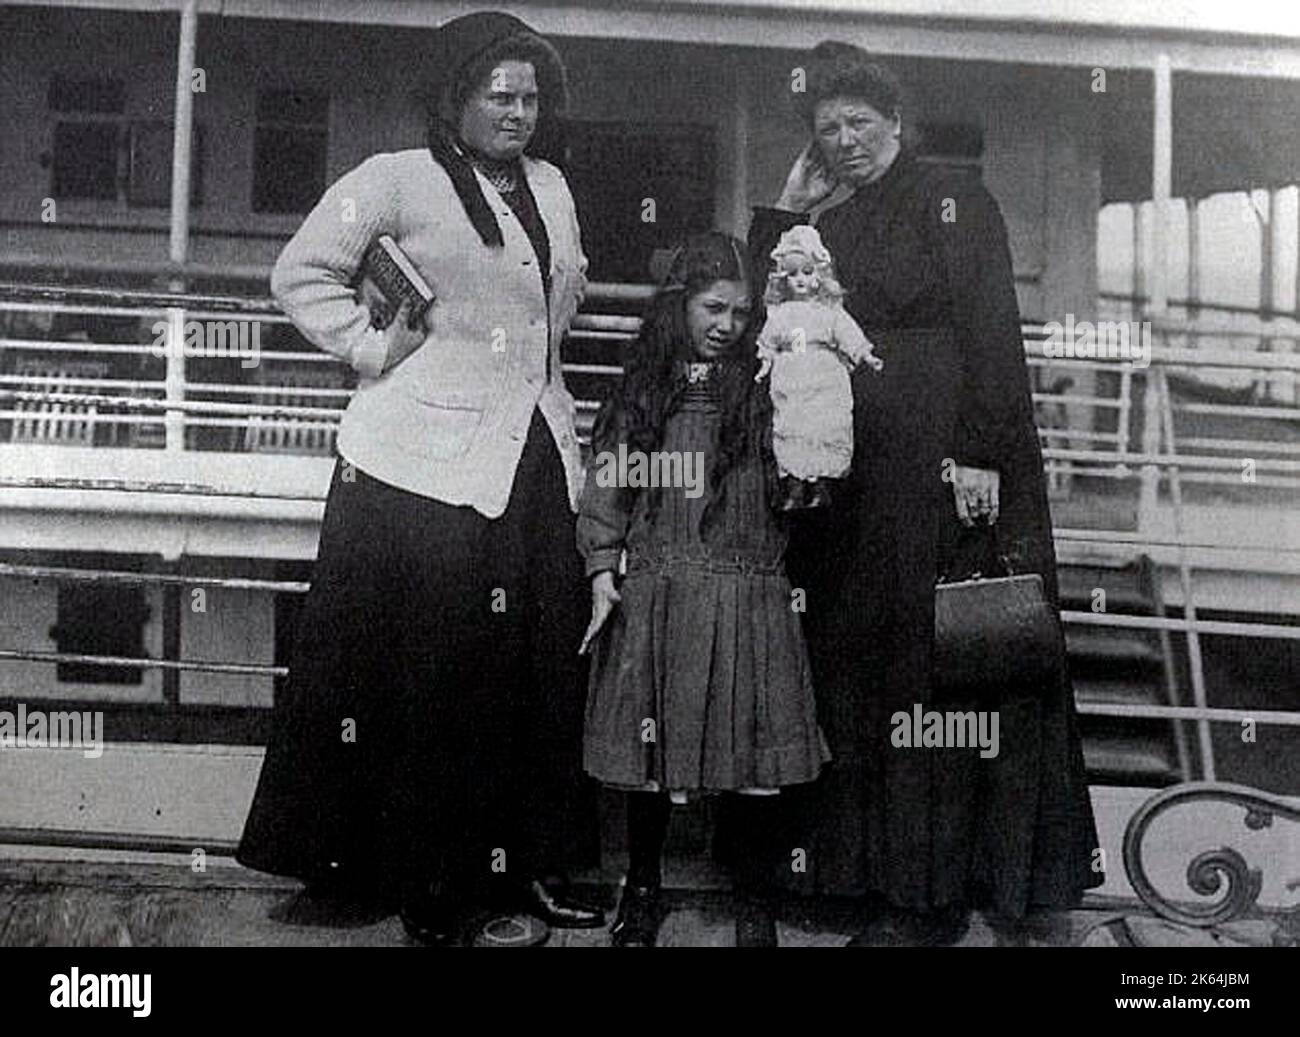 An unknown woman, young Eva Hart (1905-1996) and her Mother Esther Hart (1863-1928) returning to England after the sinking of the RMS Titanic. The luxury British passenger liner, operated by the White Star Line, sank in the North Atlantic Ocean on 15 April 1912 after striking an iceberg during her maiden voyage from Southampton, UK, to New York City. The Harts (including Father Benjamin, lost in the disaster) were Second Class Passengers en route to a new life in Canada, seeking a better life and higher living standards. Esther and Eva were rescued by the RMS Carpathia.     Date: 1912 Stock Photo